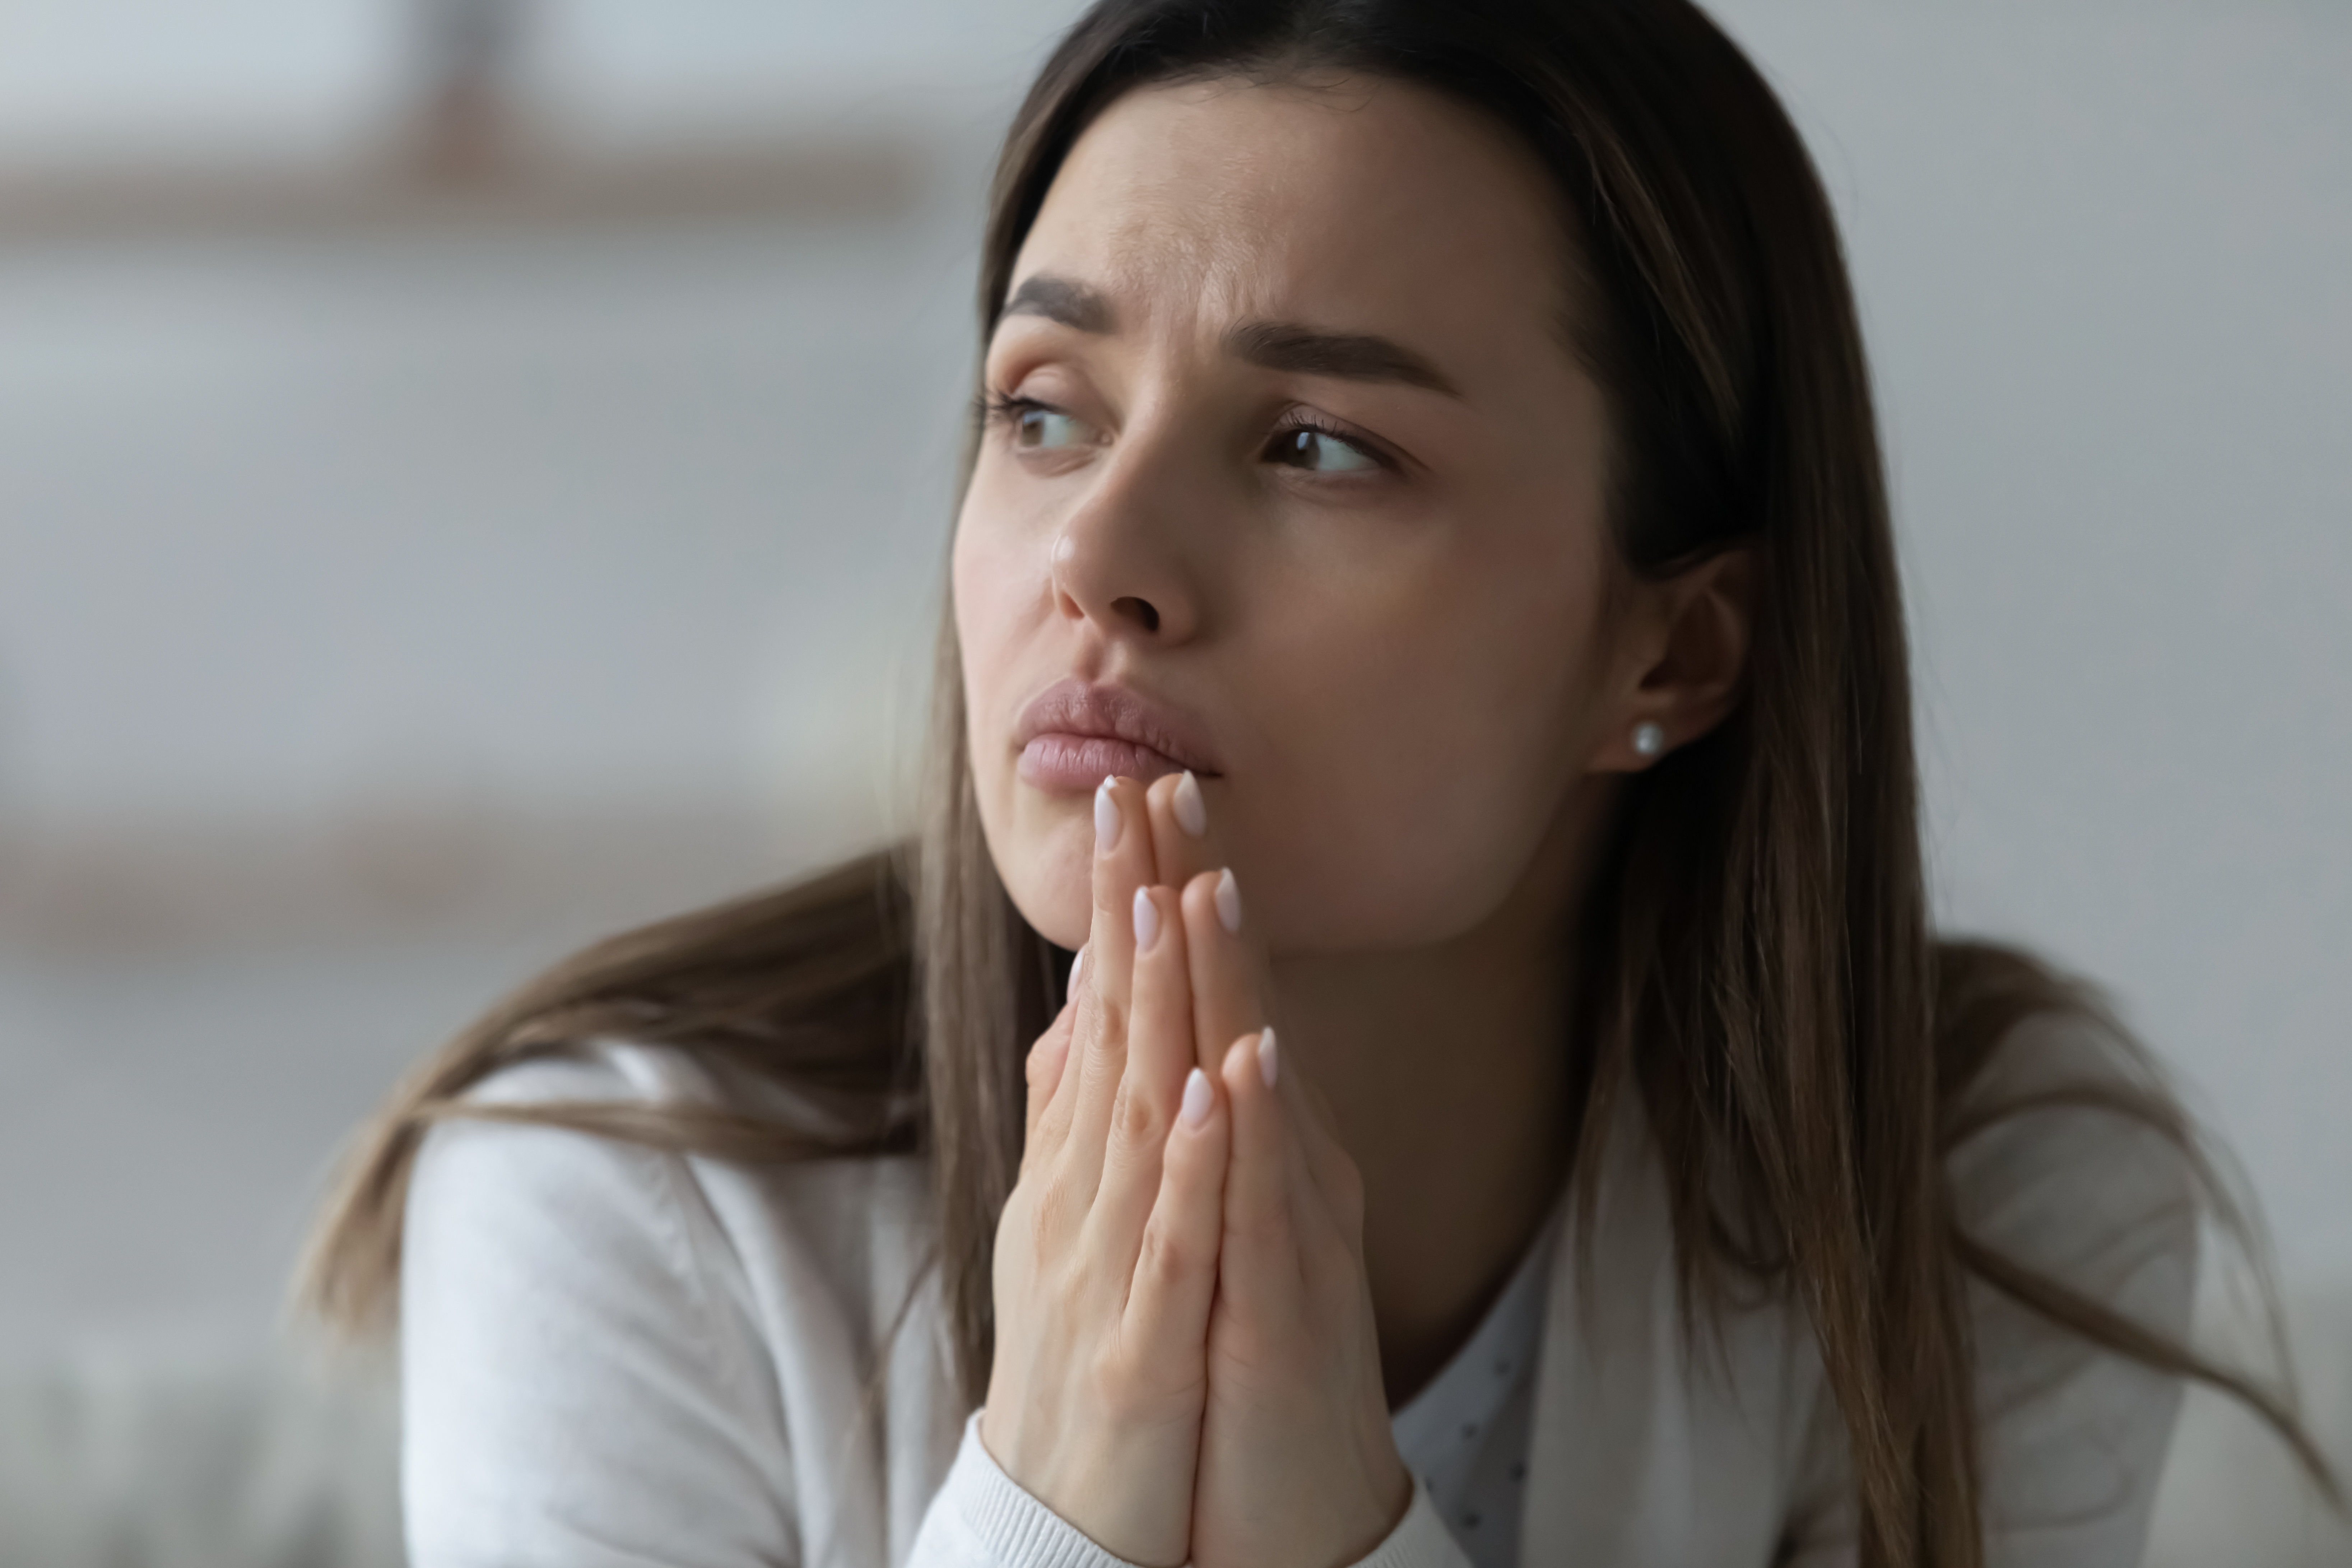 Upset thoughtful young woman | Source: Shutterstock